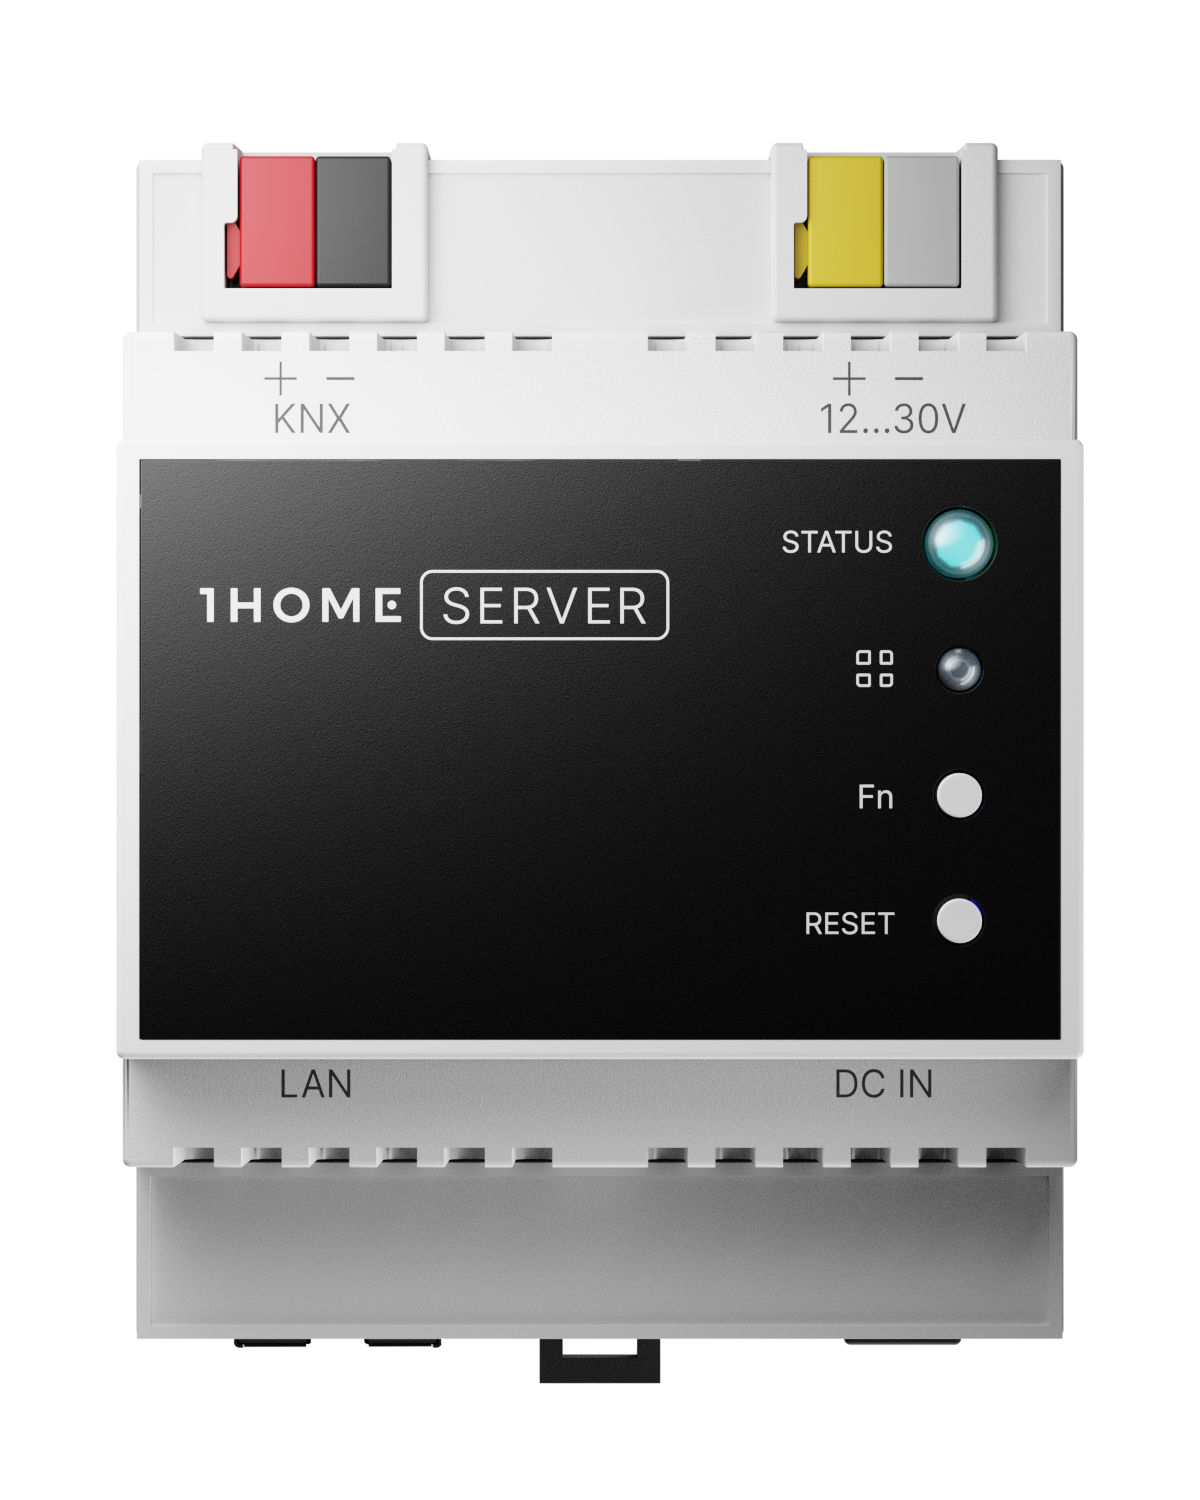 1Home Server for KNX. Full integration with Apple Home, Google Home, Samsung SmartThings, voice interfaces and Matter